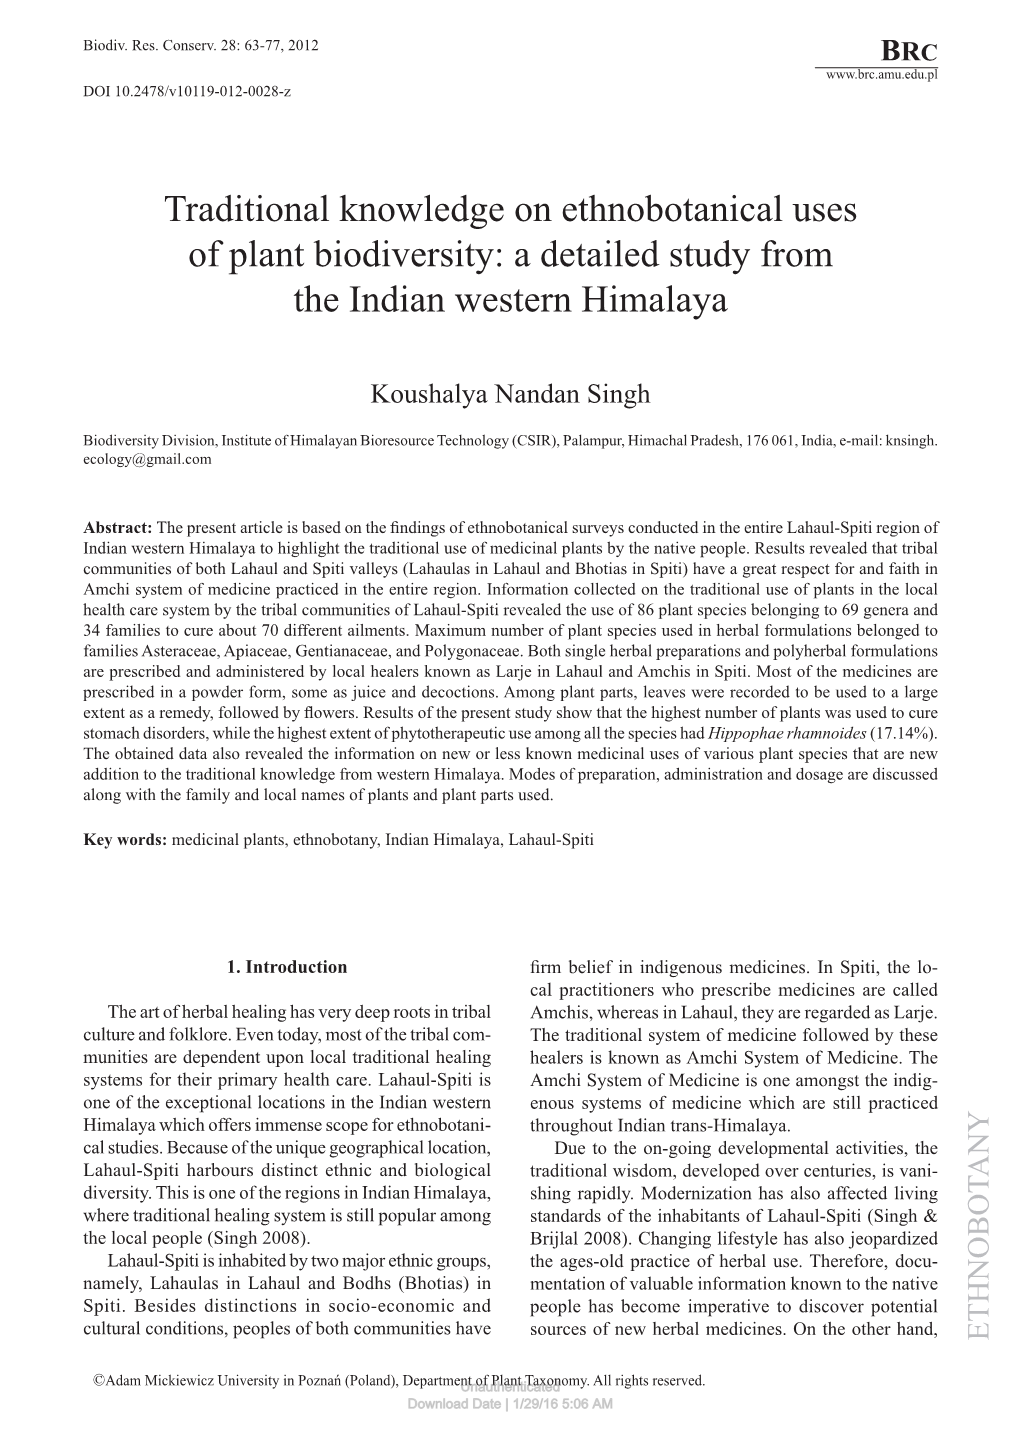 Traditional Knowledge on Ethnobotanical Uses of Plant Biodiversity: a Detailed Study from the Indian Western Himalaya